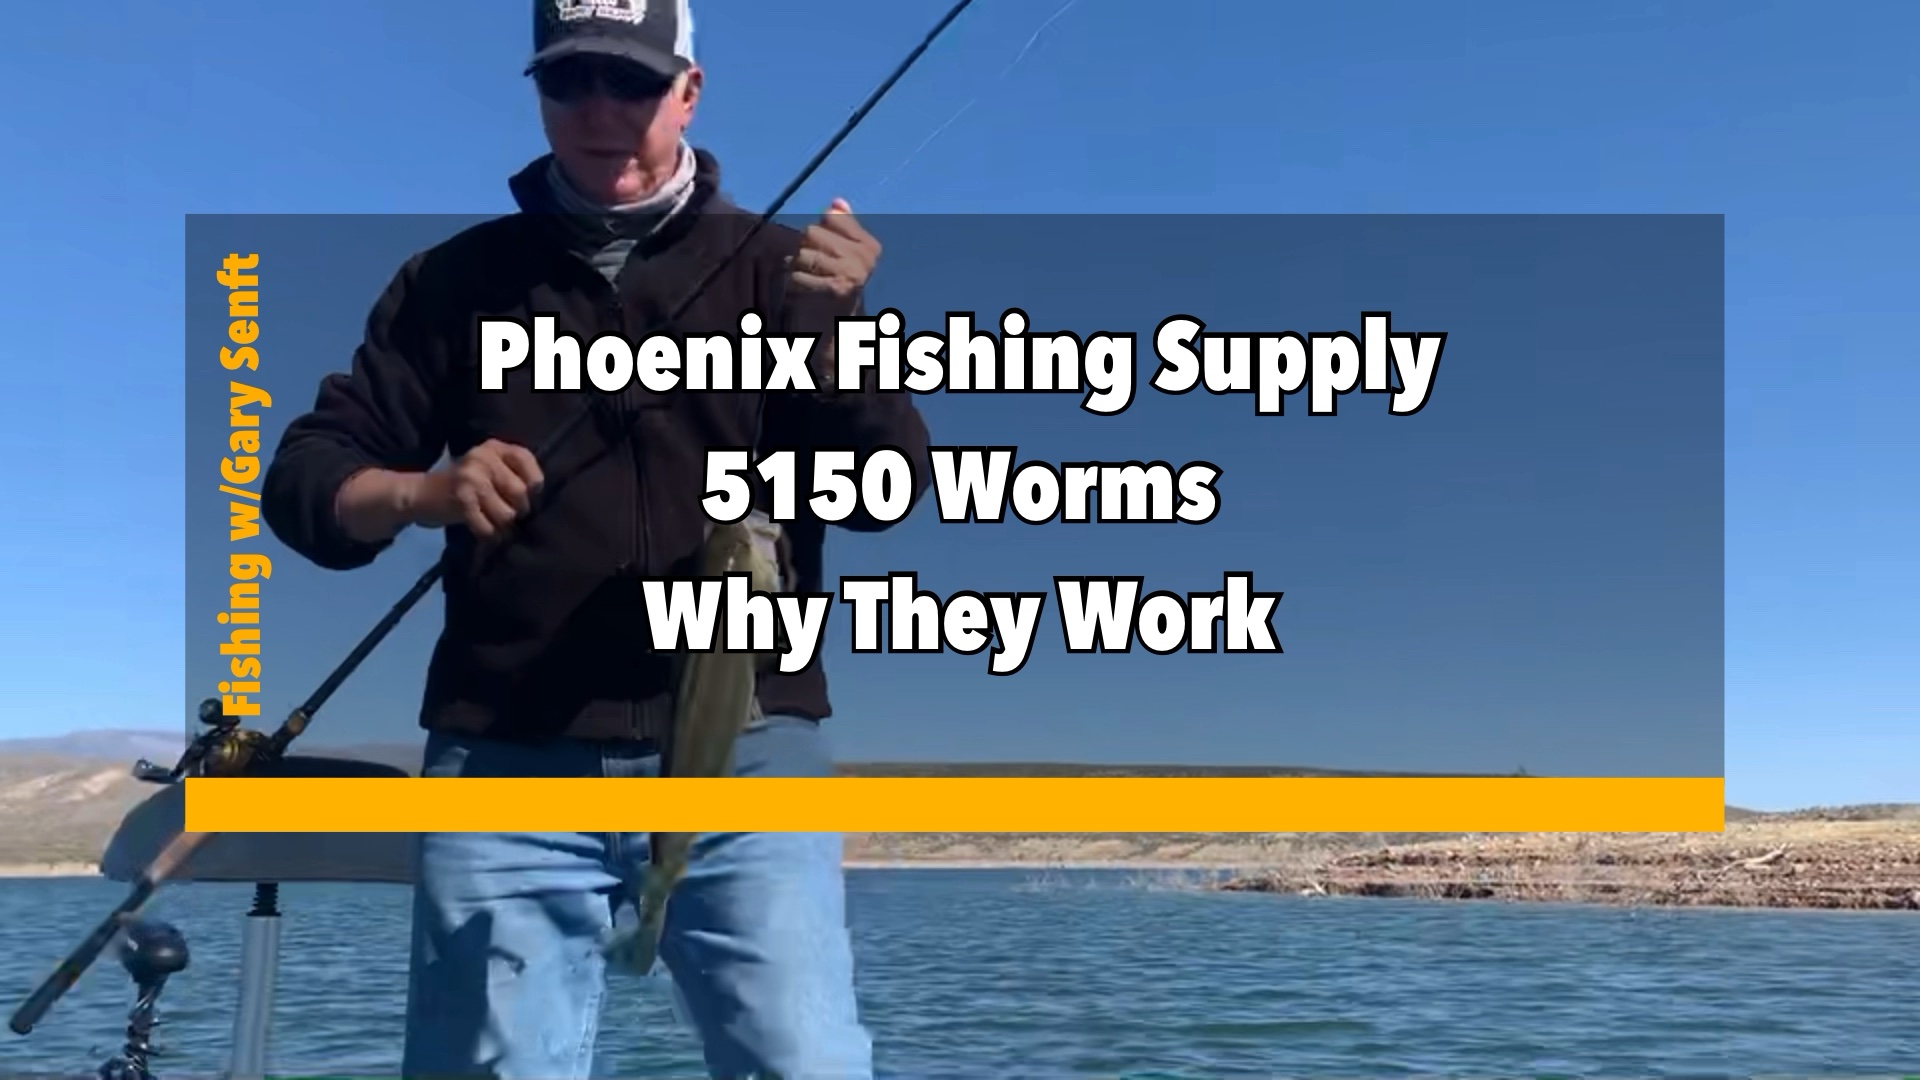 5150 Worms at Phoenix Fishing Supply and Why They Work